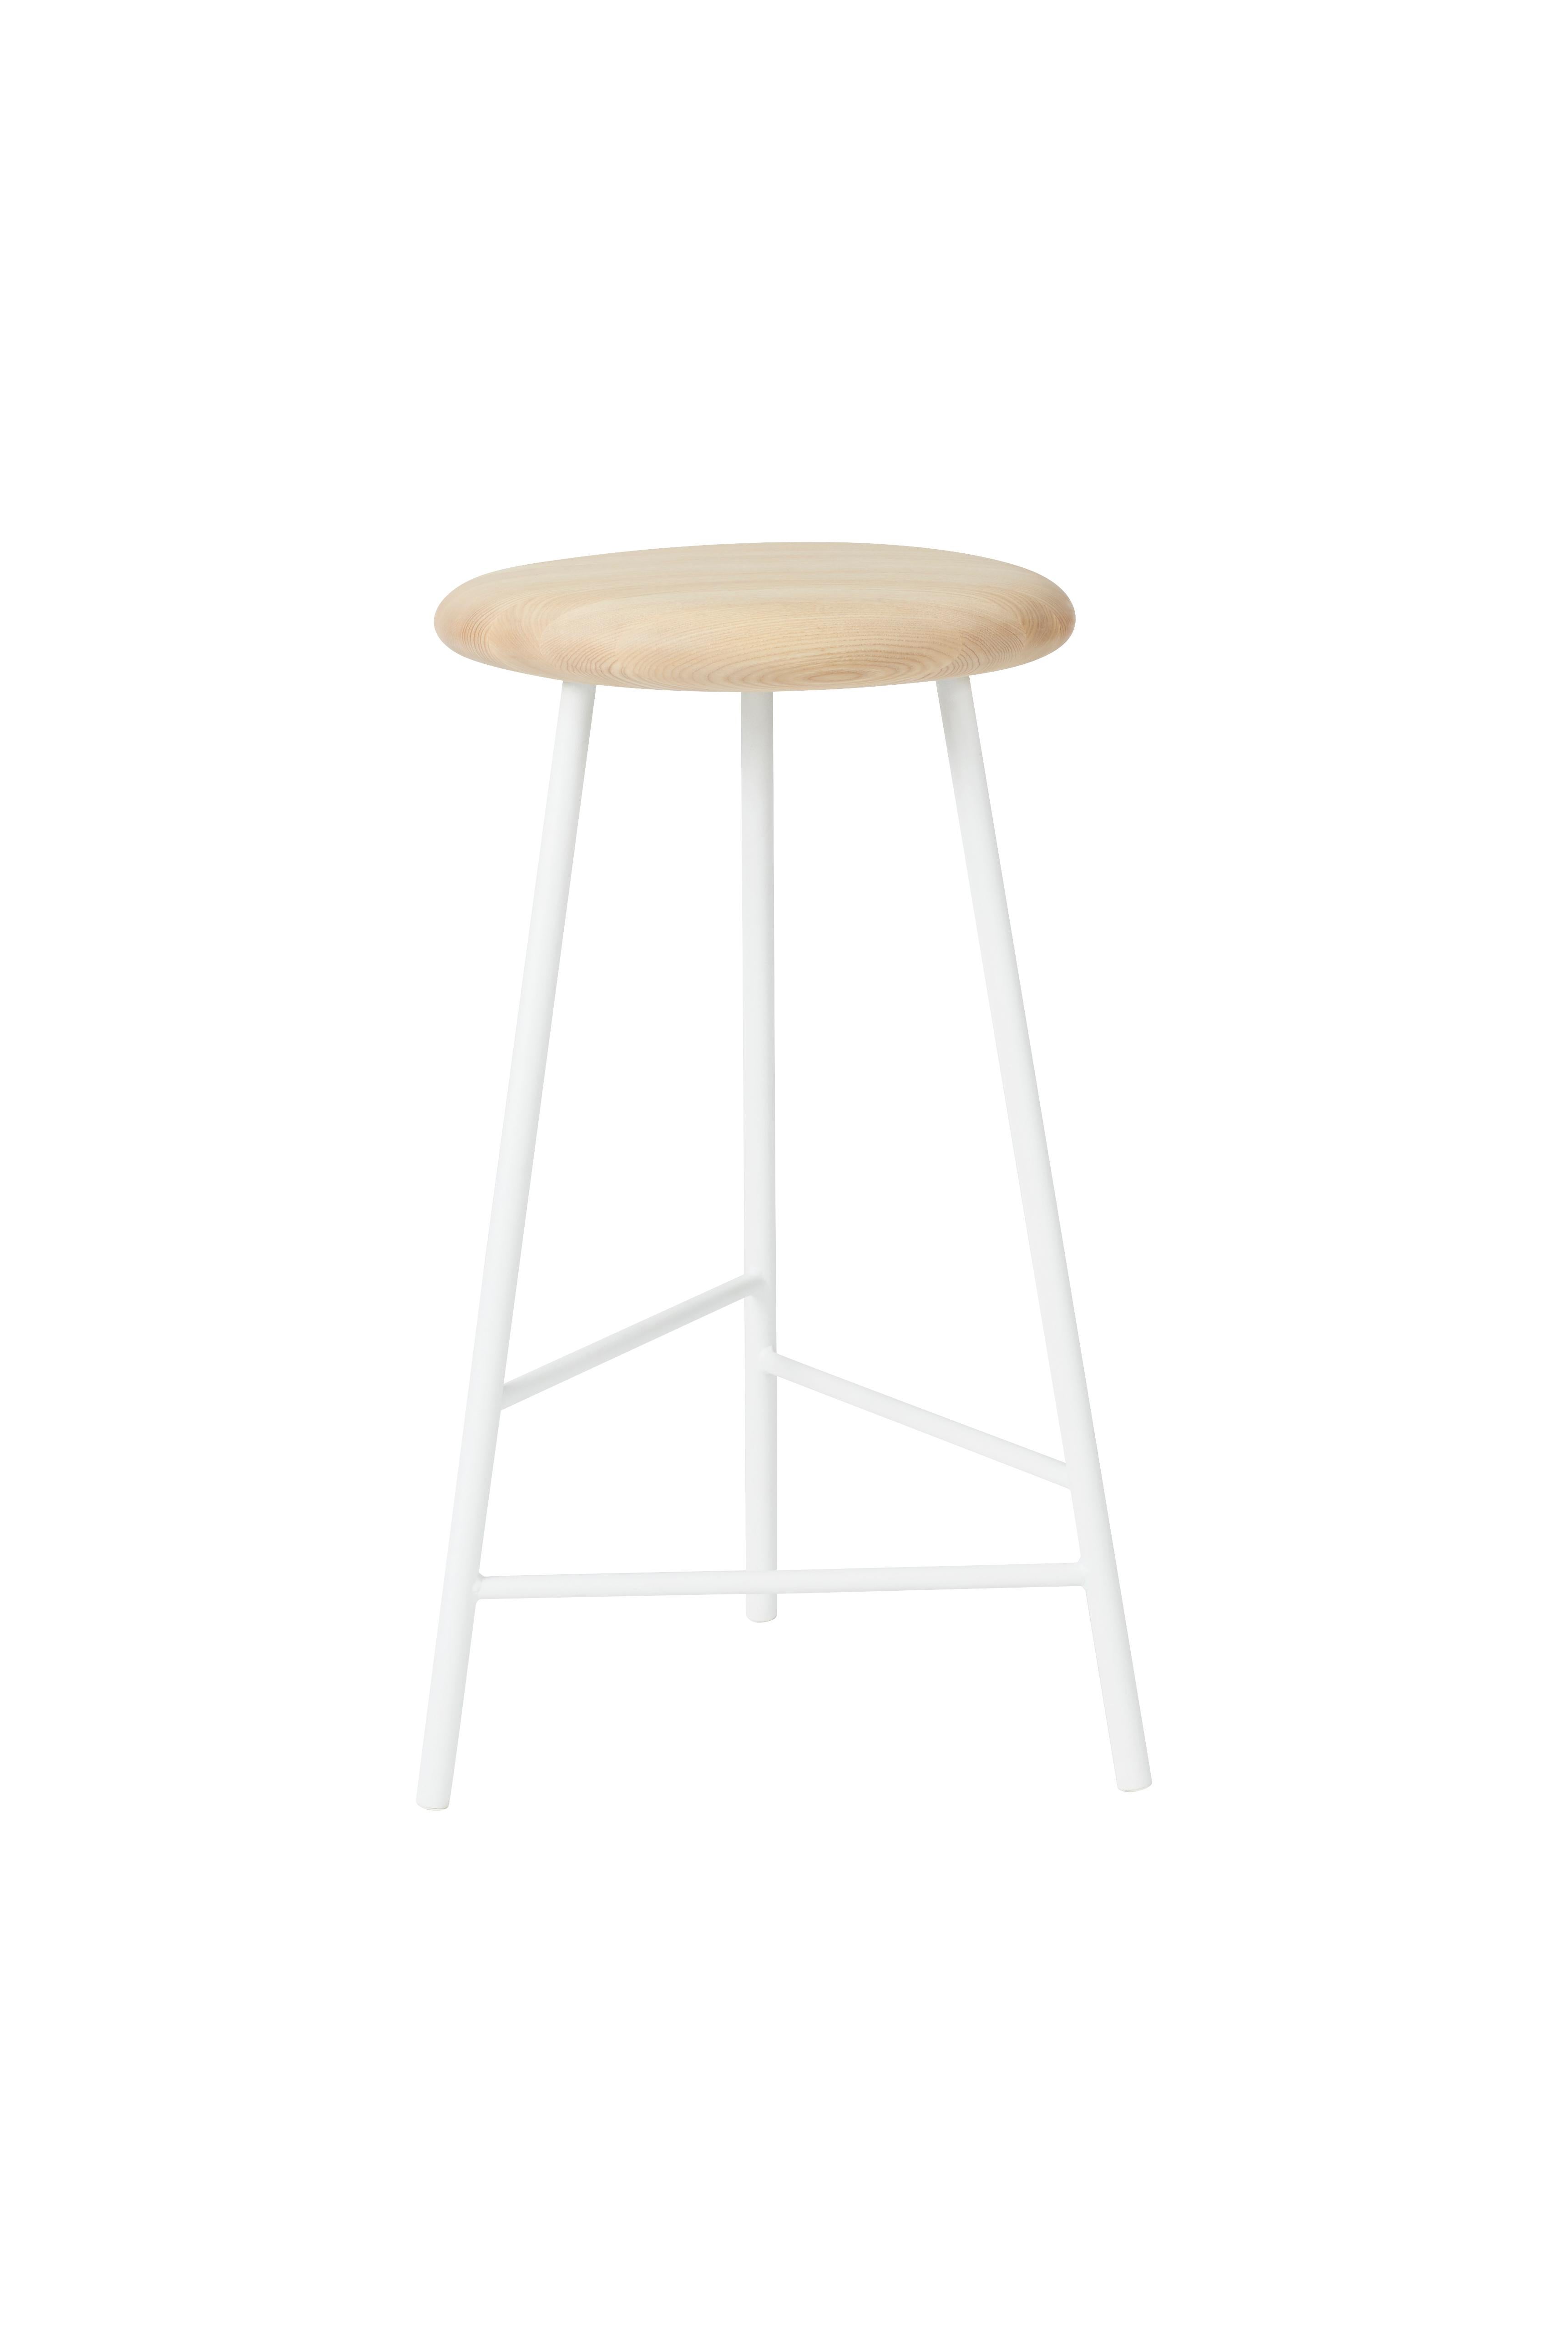 For Sale: White (Ash/White) Pebble Counter Stool, by Welling / Ludvik from Warm Nordic